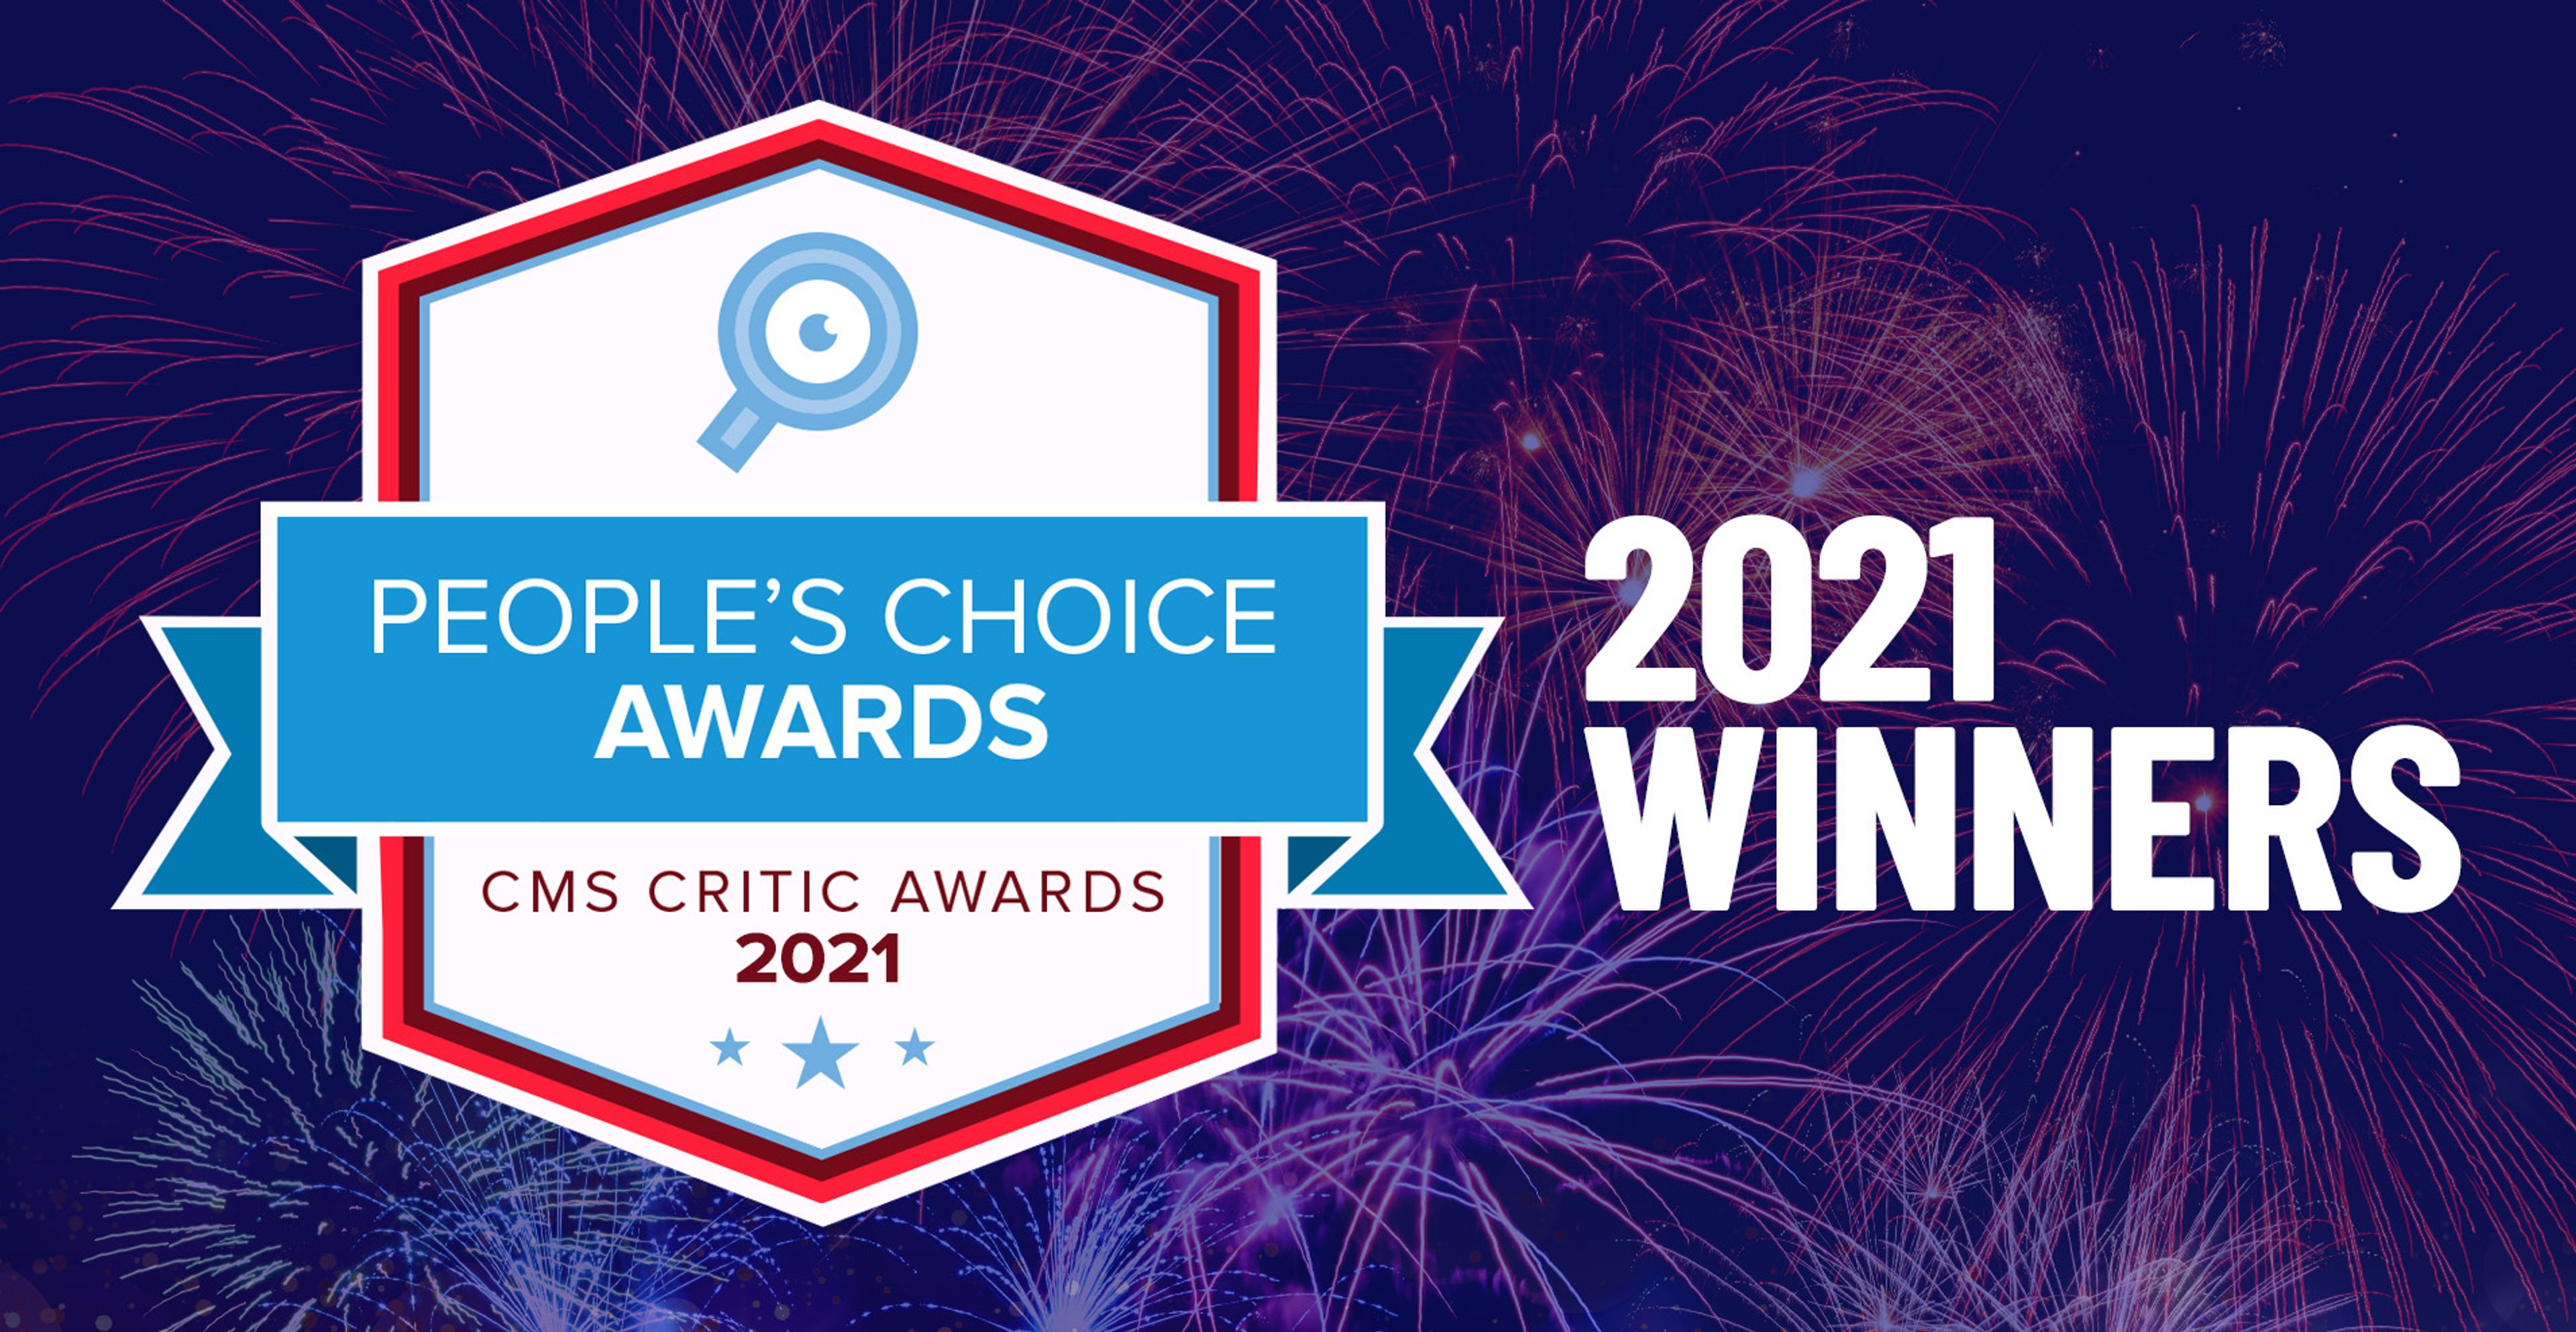 Image of the 2021 CMS Critic People's Choice Awards logo with the Text "2021 Winners" to the right, all against a background image of fireworks.